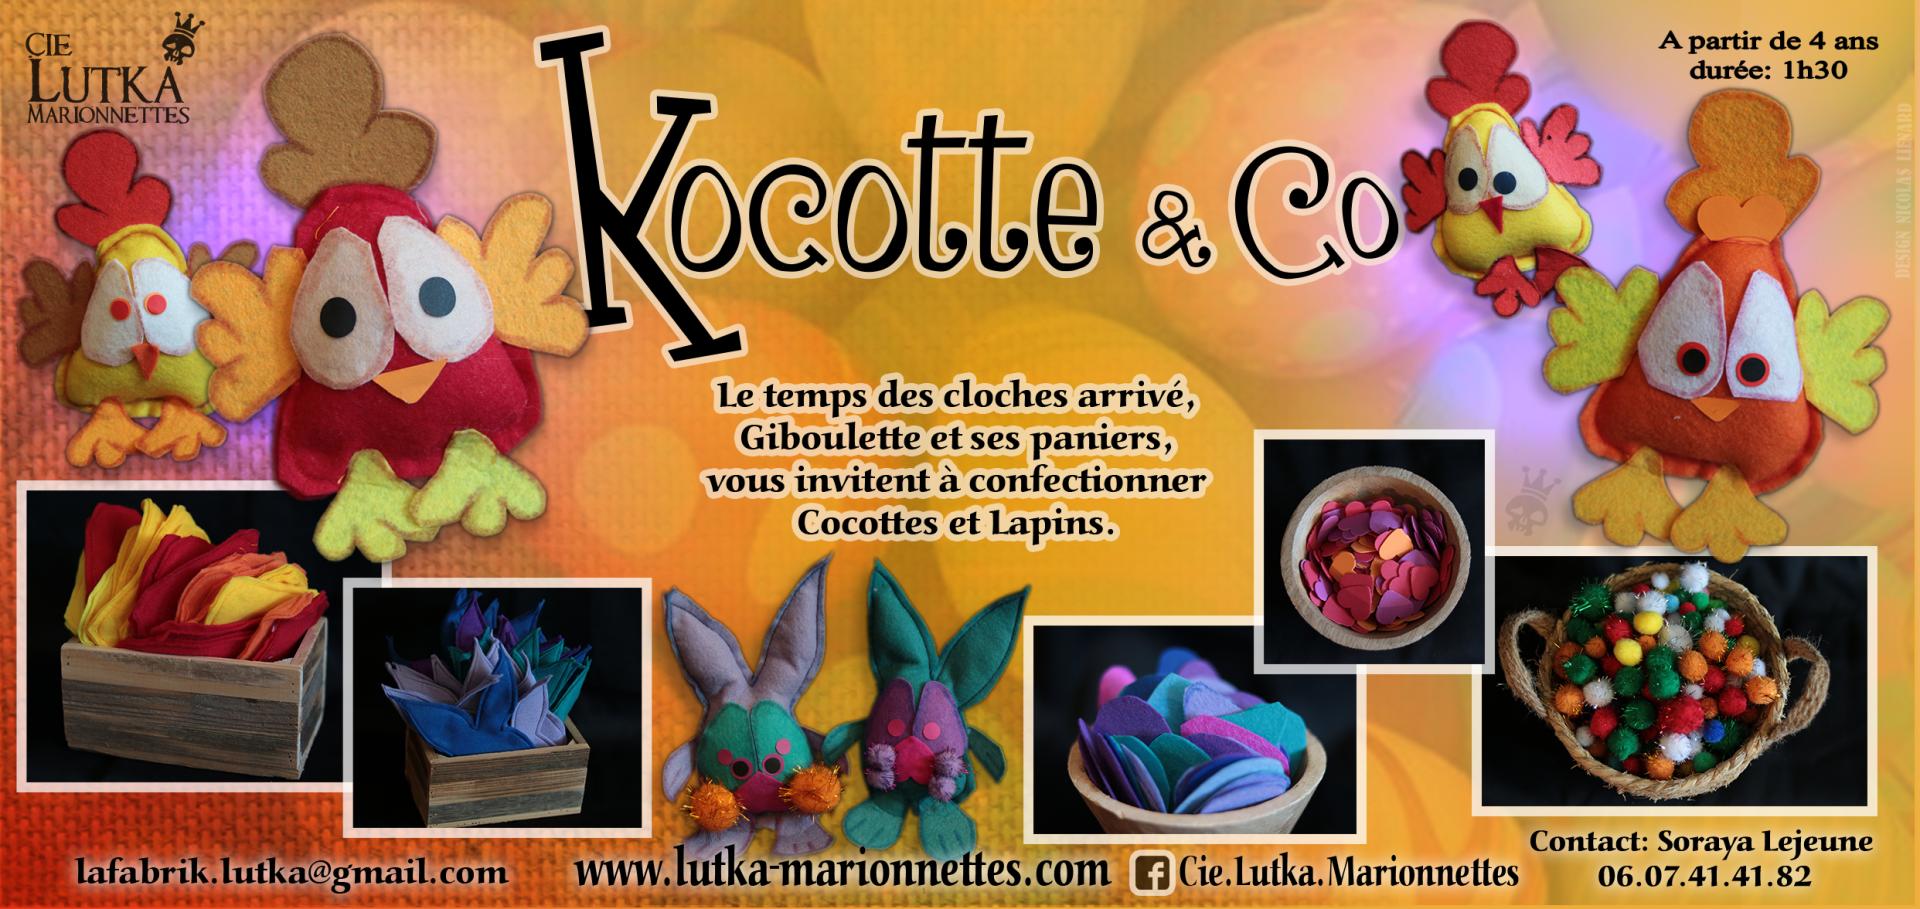 Kocotte and co